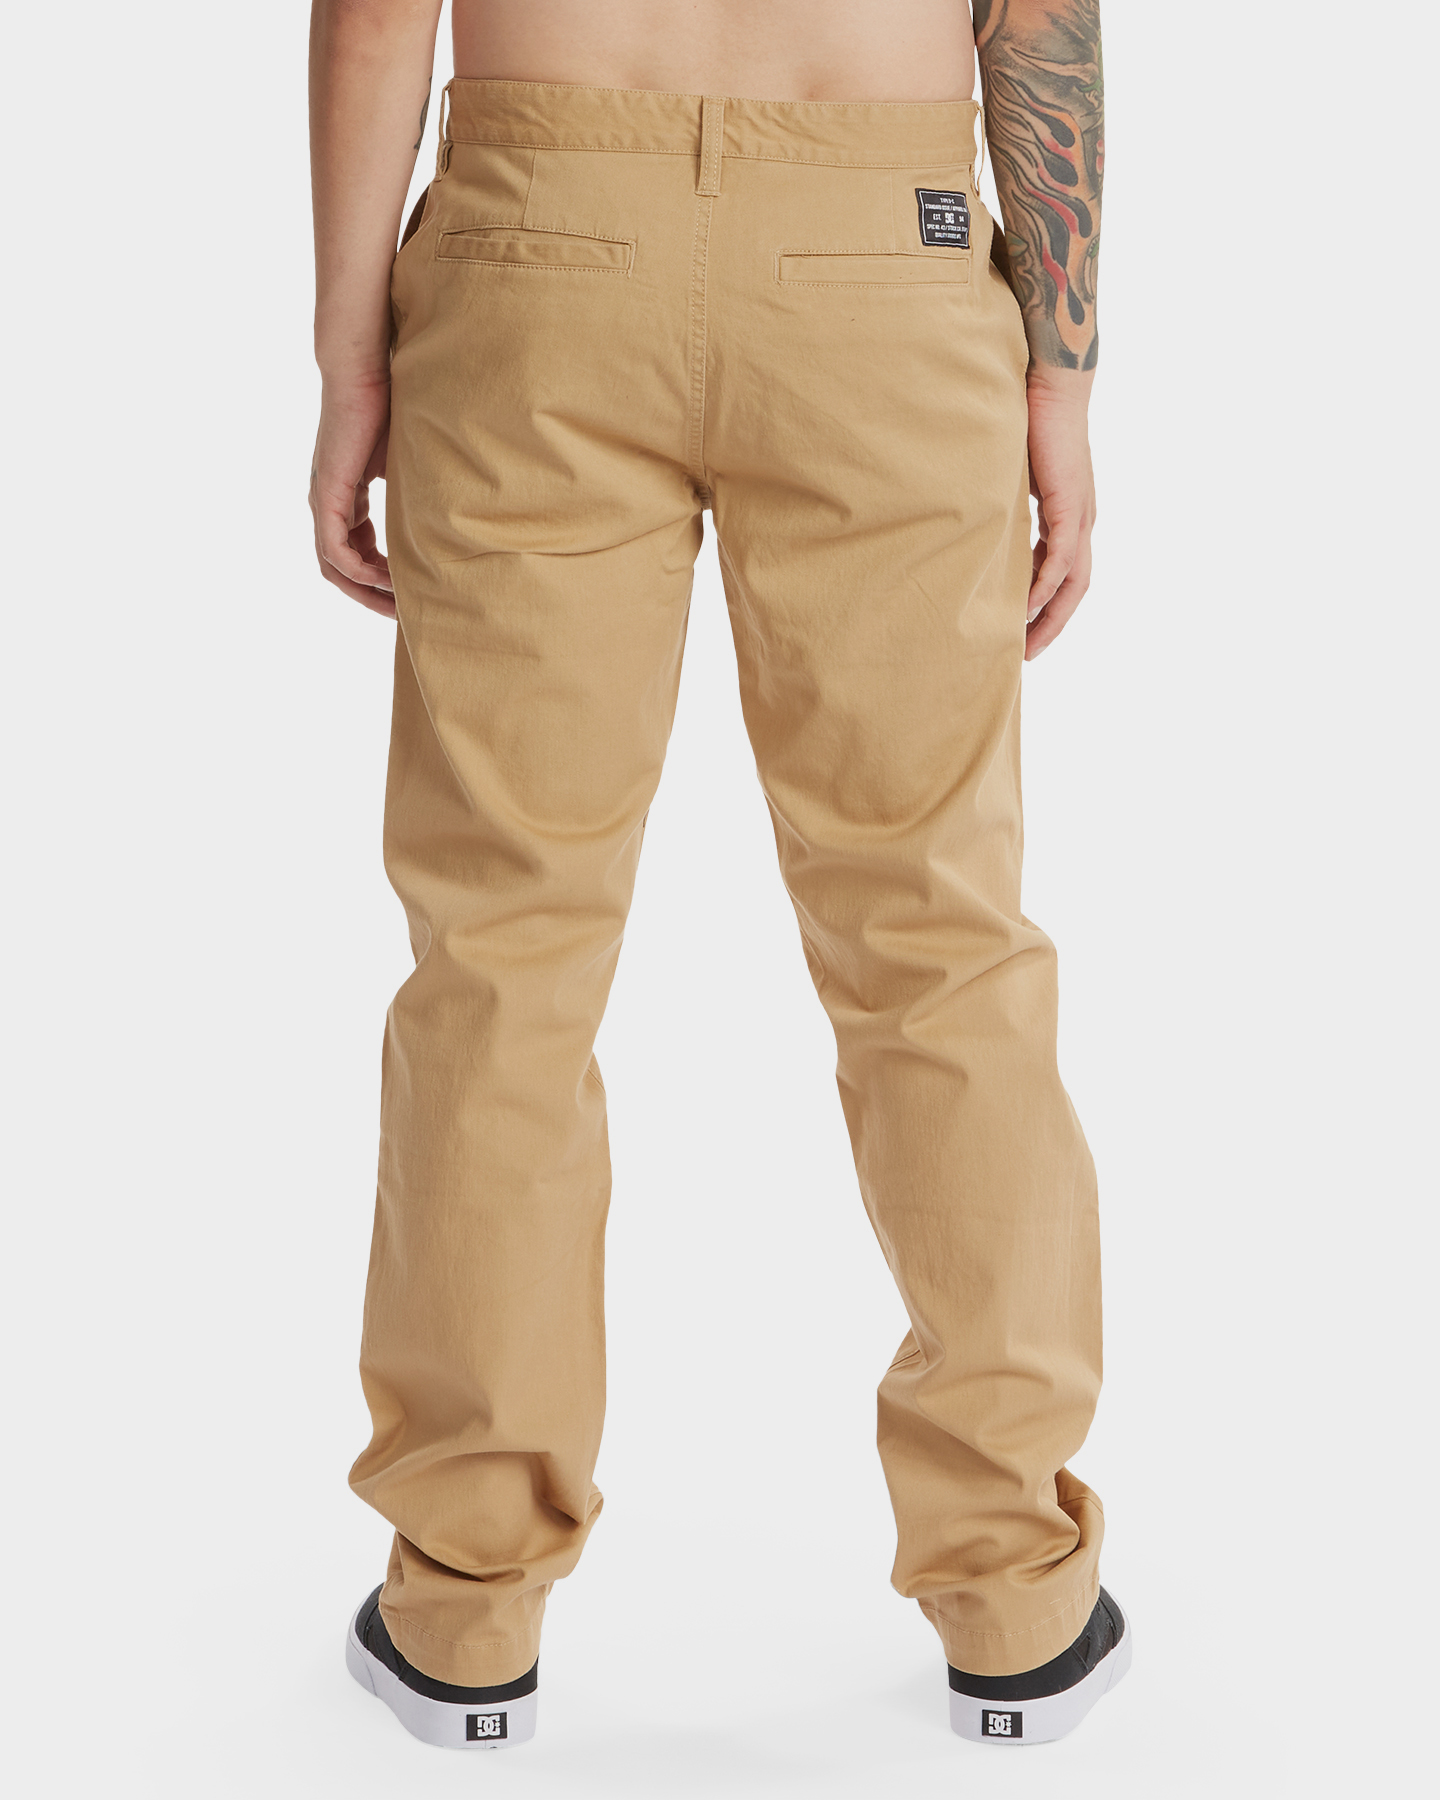 Dc Shoes Mens Worker Chino Pant - Incense | SurfStitch